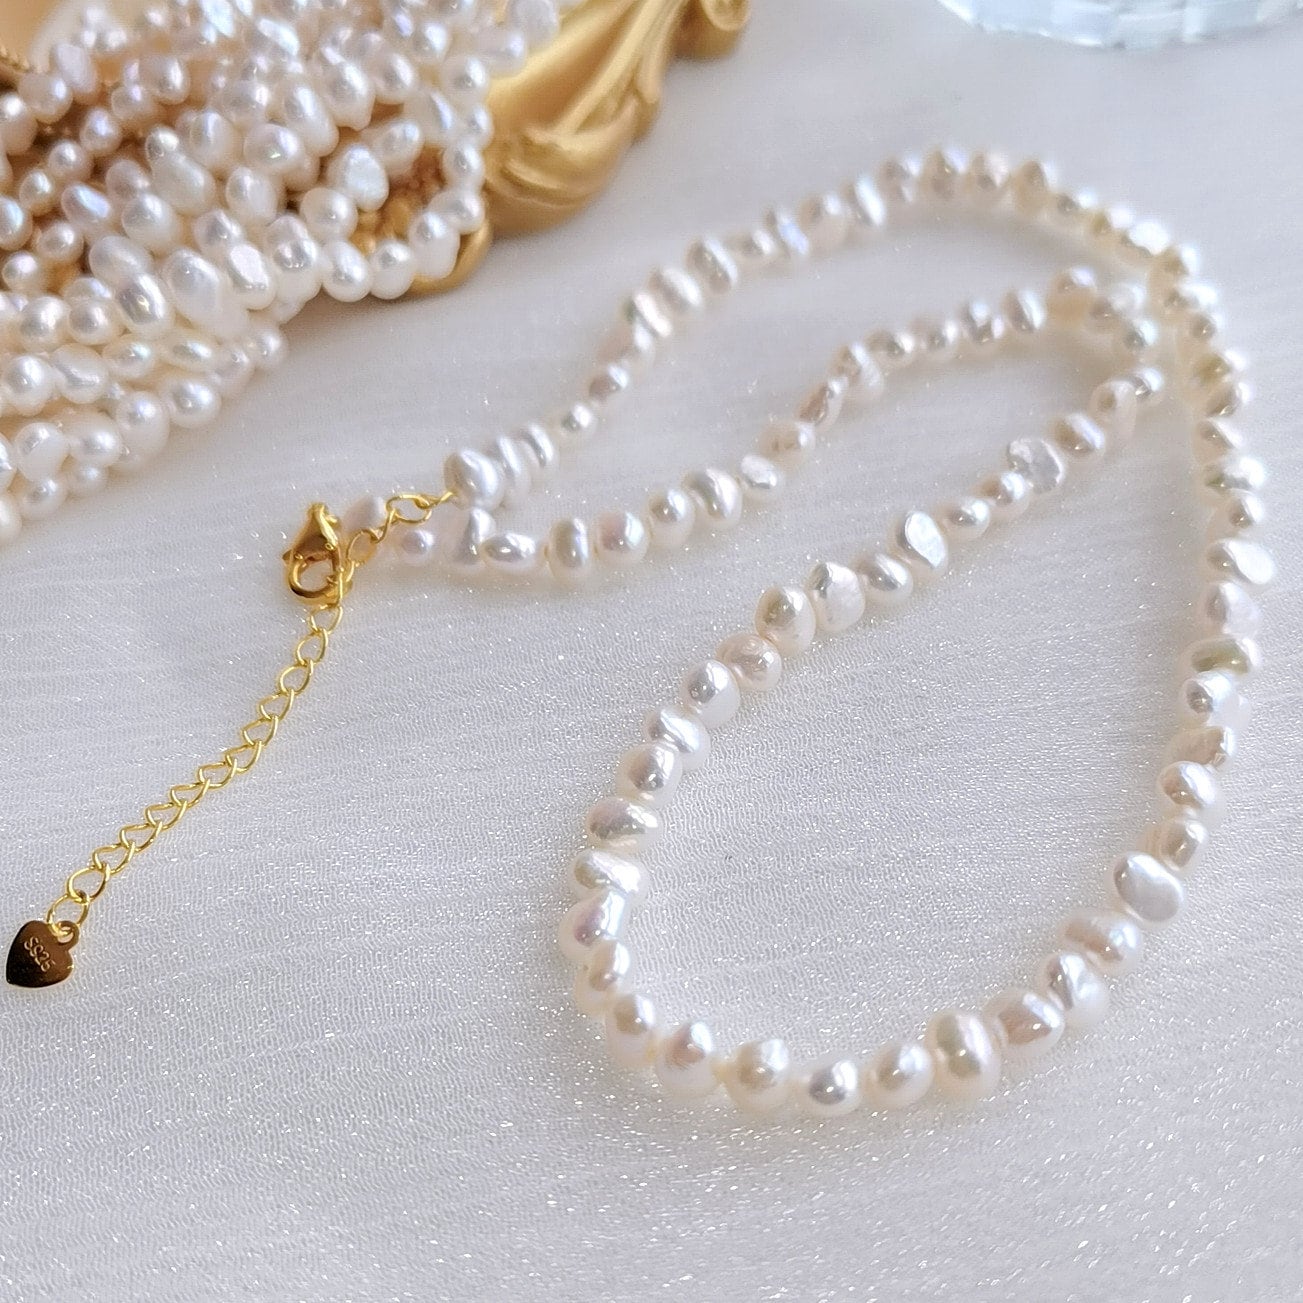 Pogue Necklace, inspired by Netflix's Outer Banks, with Pearl and Shell or  Pearl and Bead